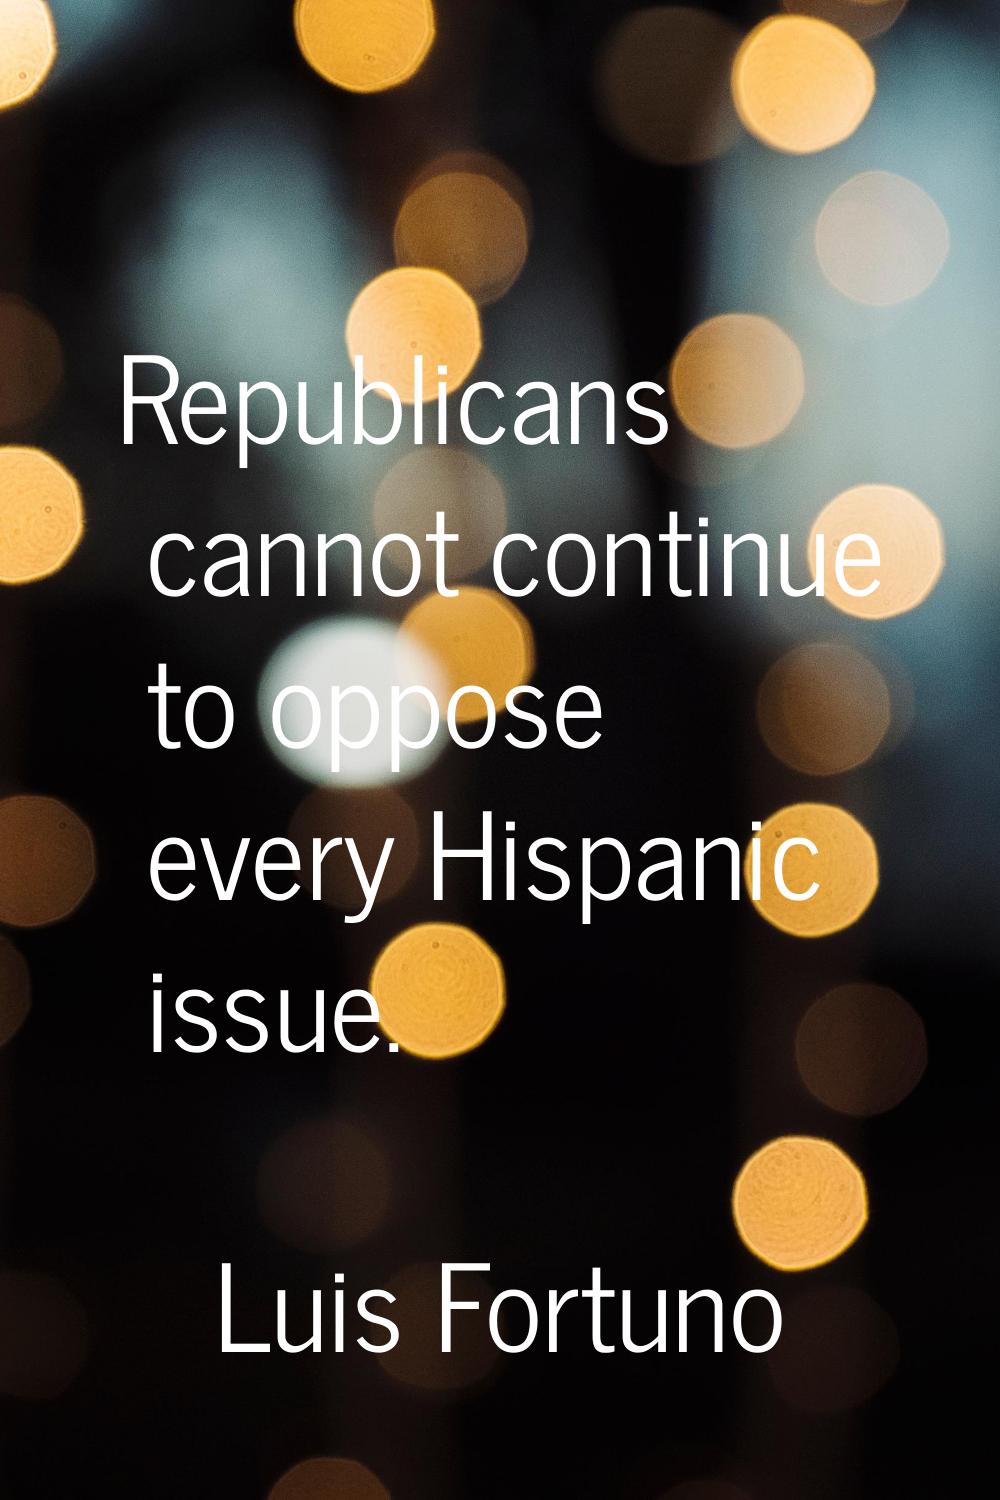 Republicans cannot continue to oppose every Hispanic issue.